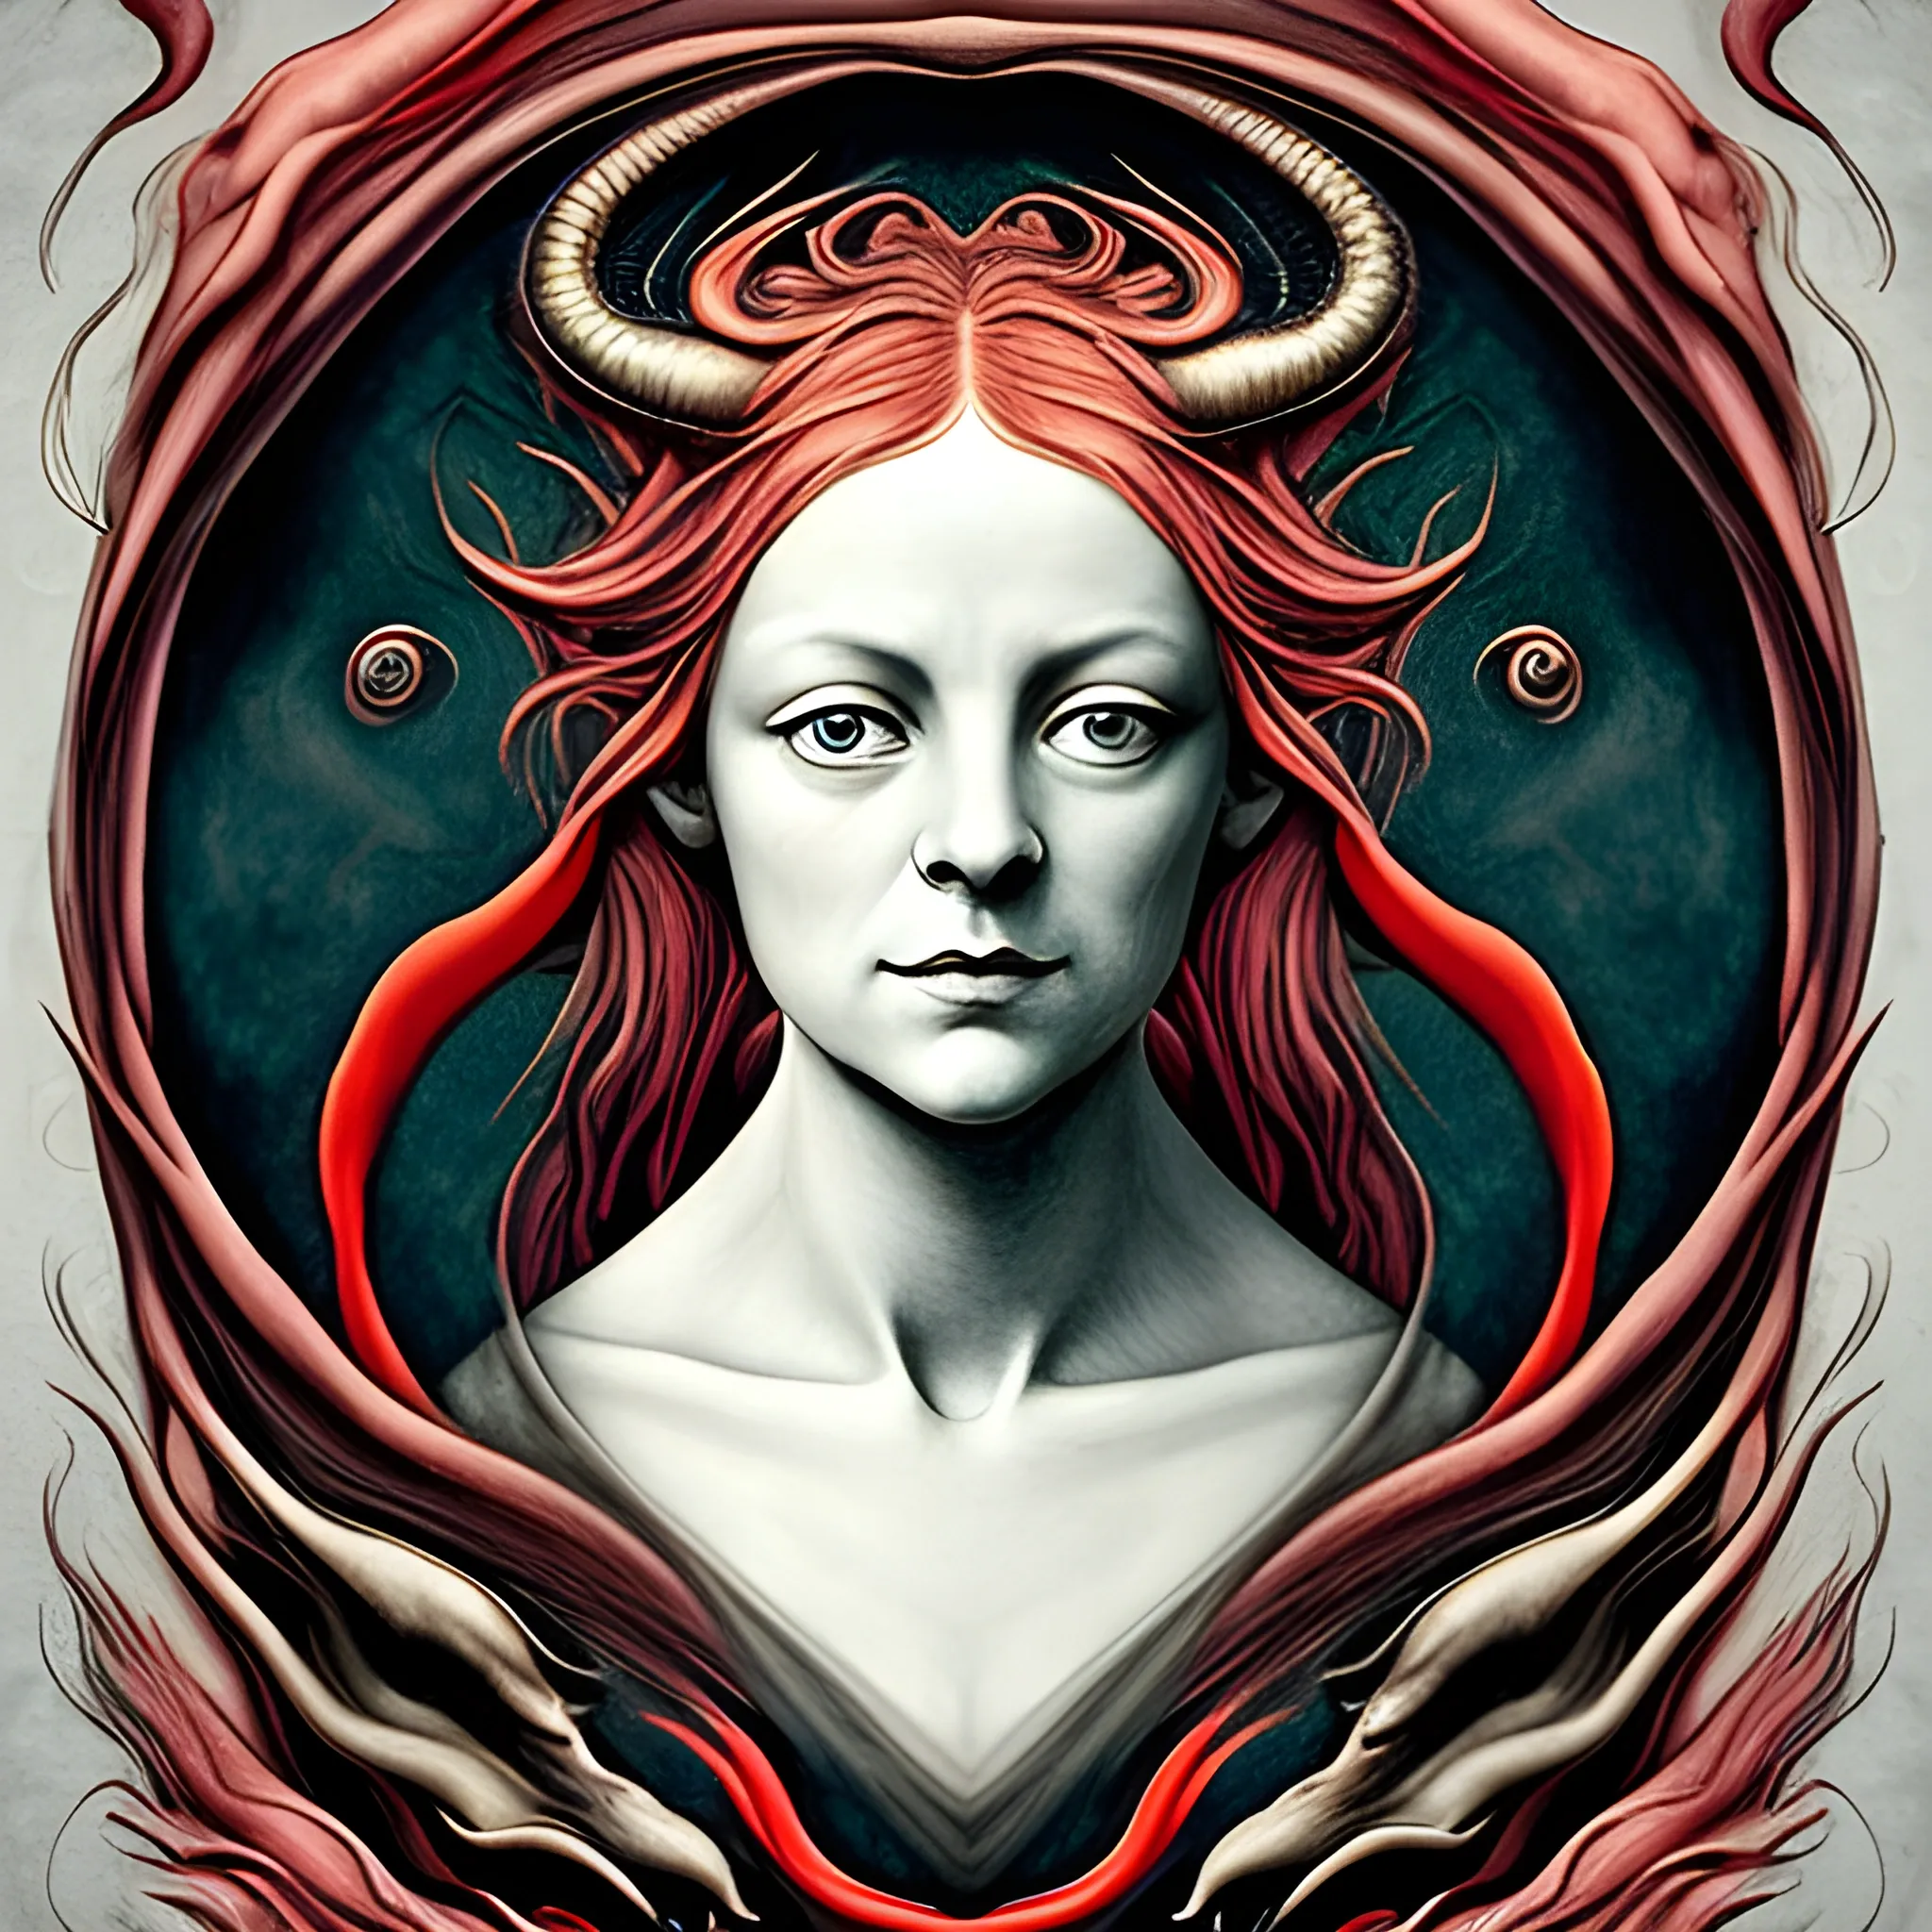 create a reproduction of a female portrait "The Great Red Dragon" by William Blake. Whimsical elements, eerie atmosphere, chaotic background. Surrealist style, abstract, irrational, subconscious, abstract forms and shapes, sense of otherworldliness